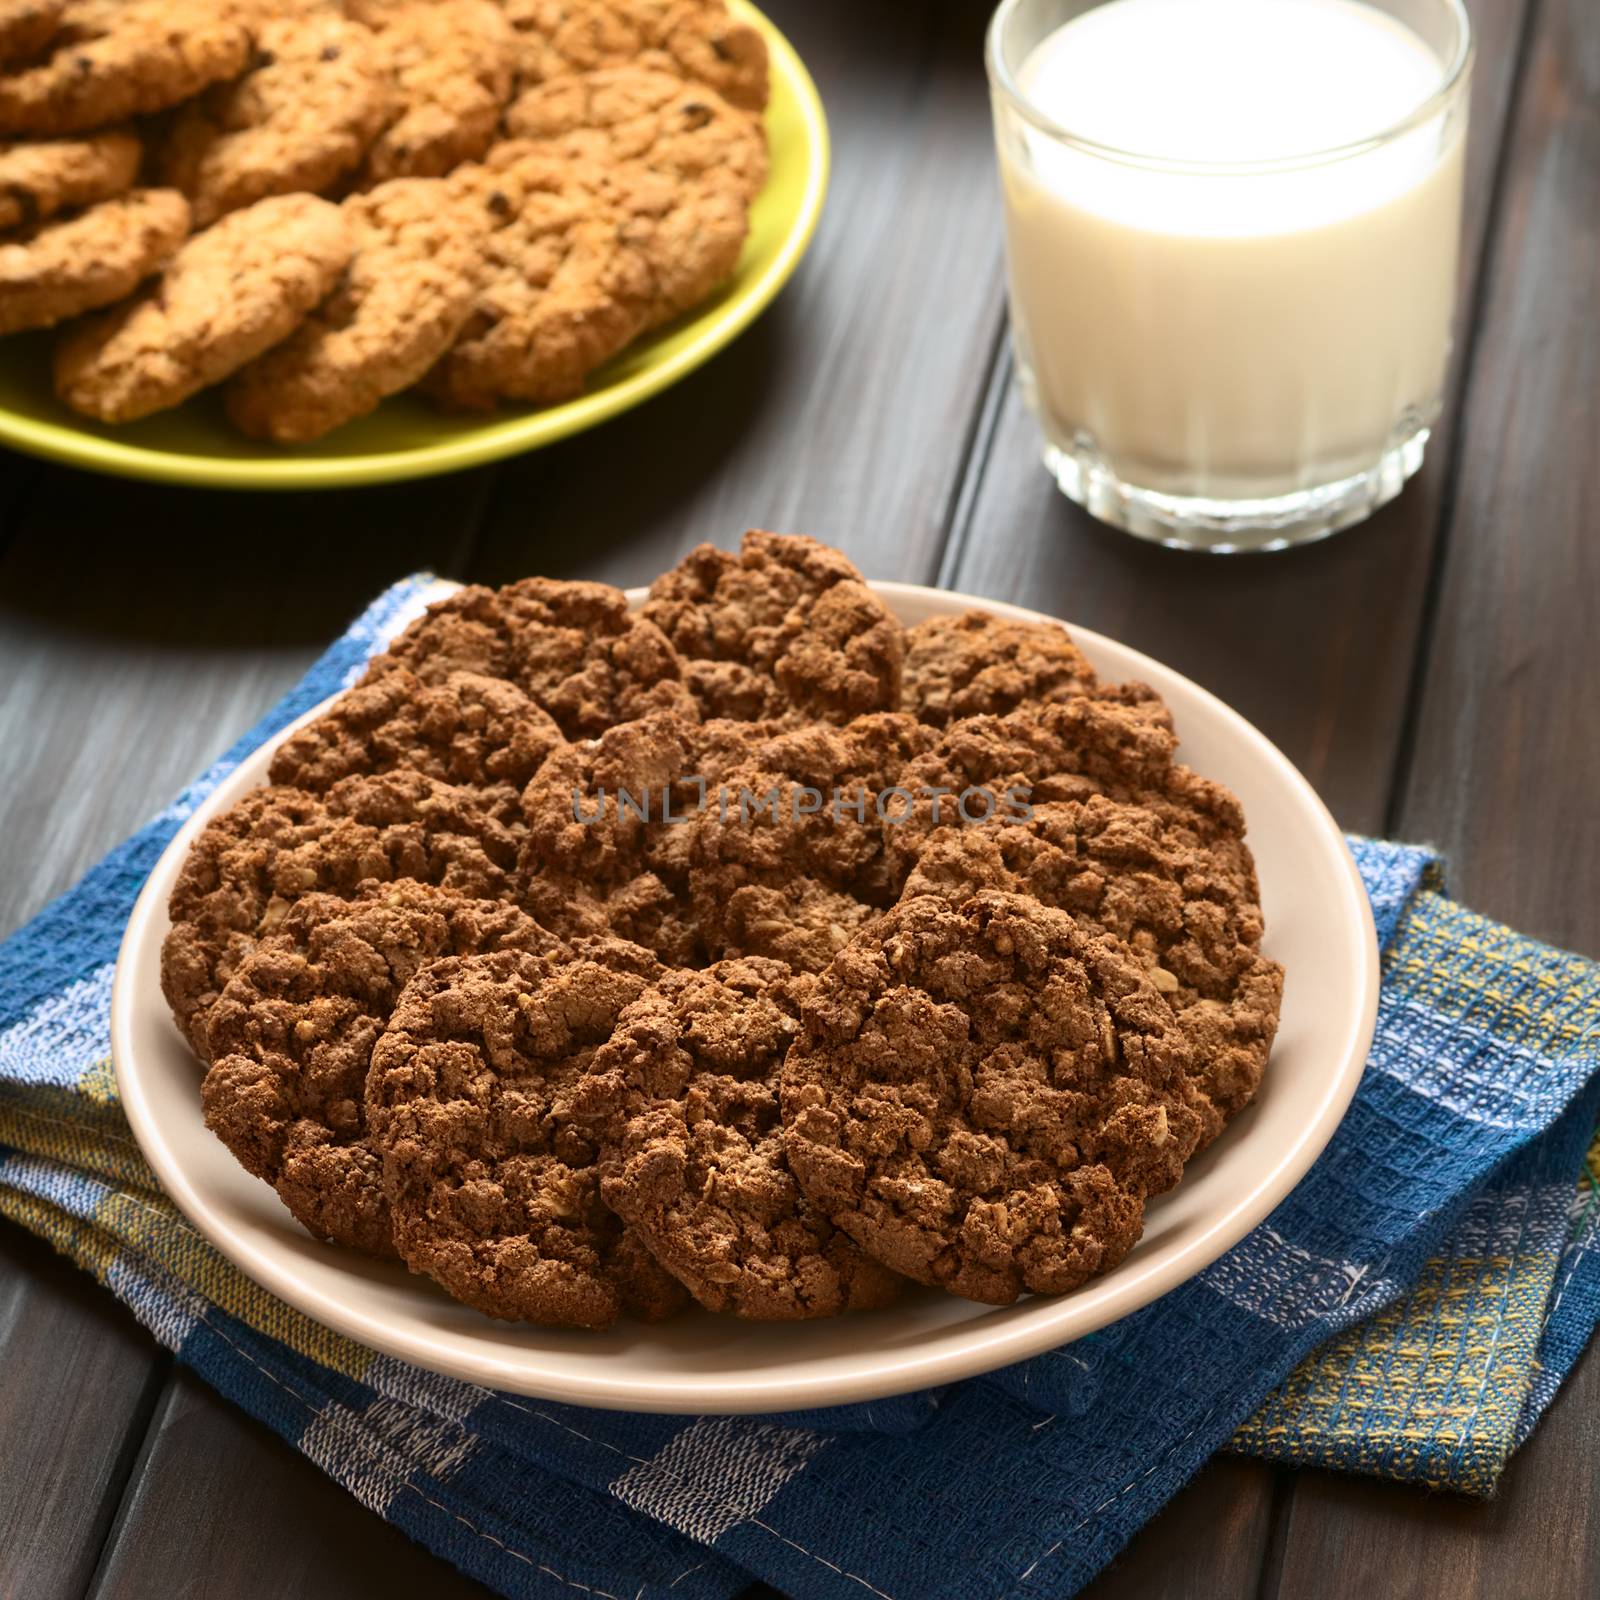 Chocolate oatmeal cookies on plate with a glass of milk and oatmeal-apple cookies in the back, photographed with natural light (Selective Focus, Focus on the first cookies)